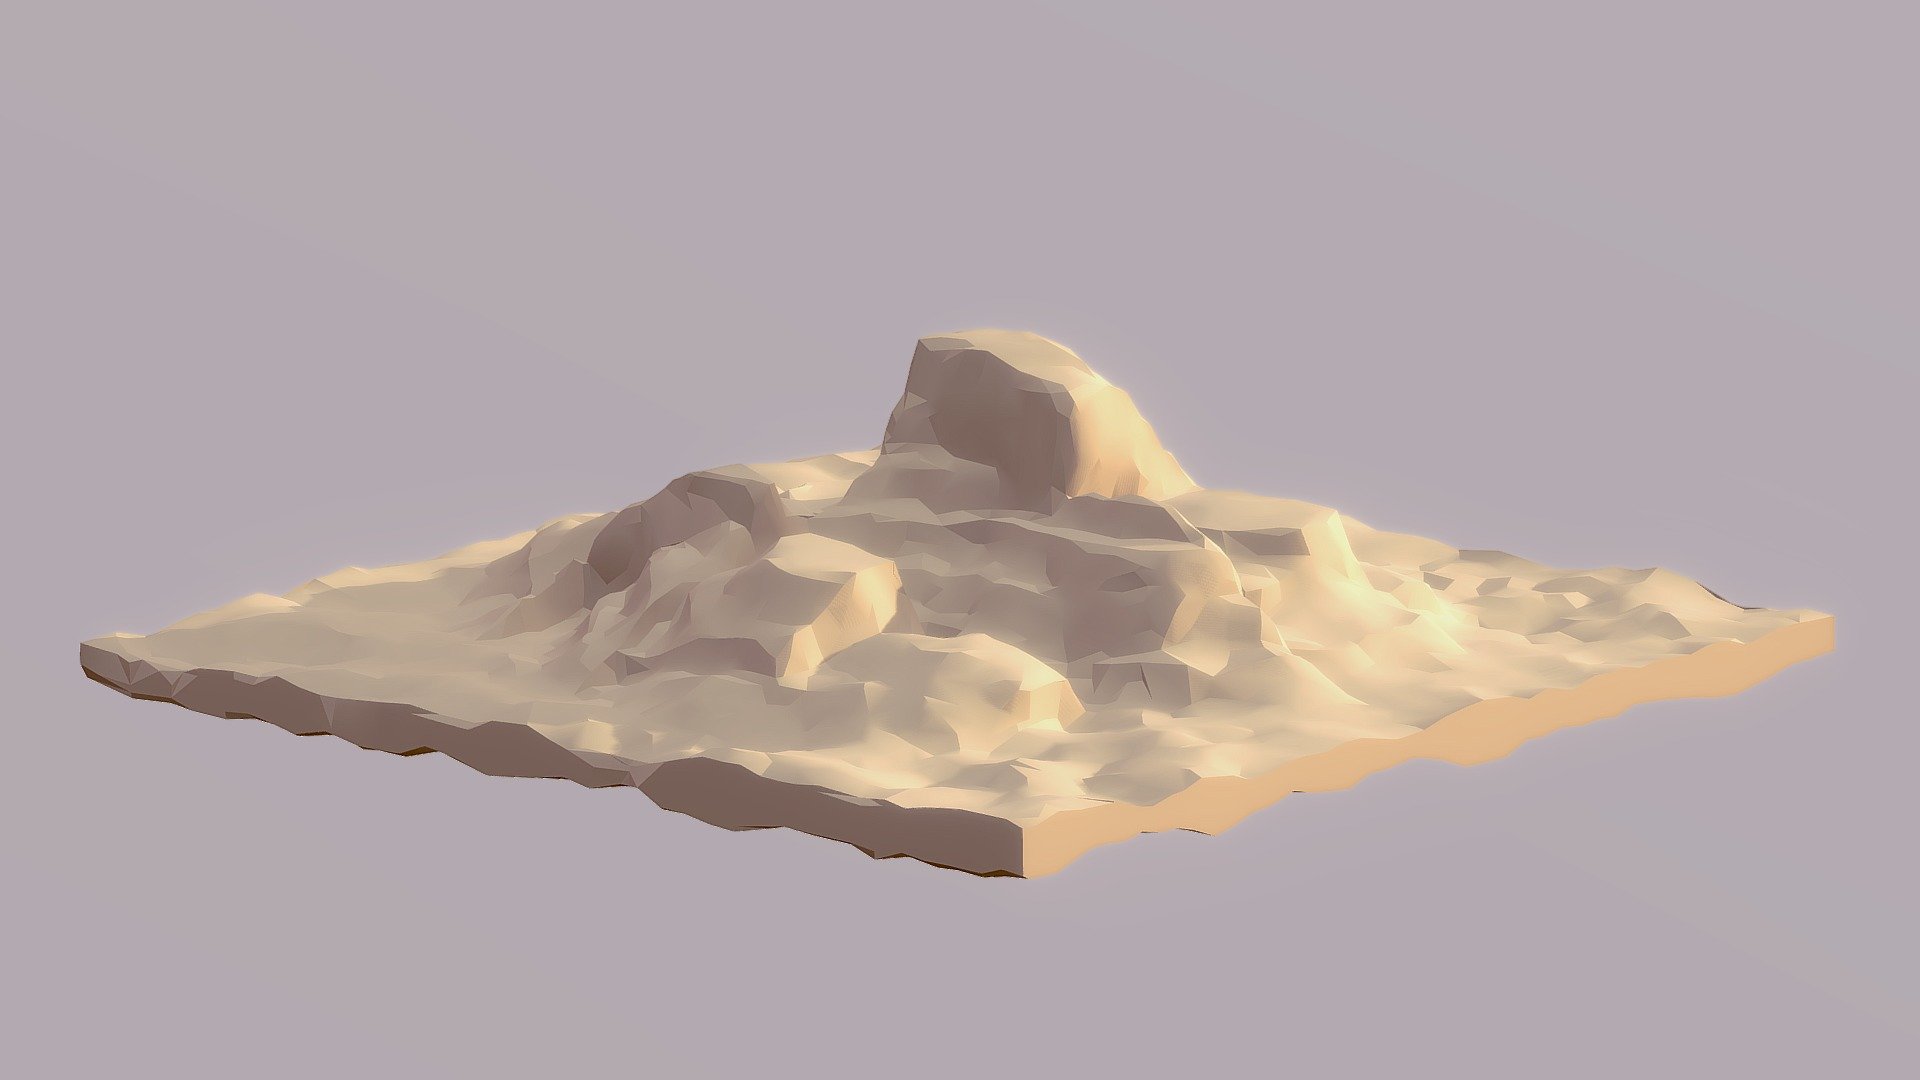 Recently discovered the Blender addon ANT Landscape, and used it to create a base terrain mesh that I then manipulated with modifiers and standard modelling to create this faceted Desert terrain 3d model